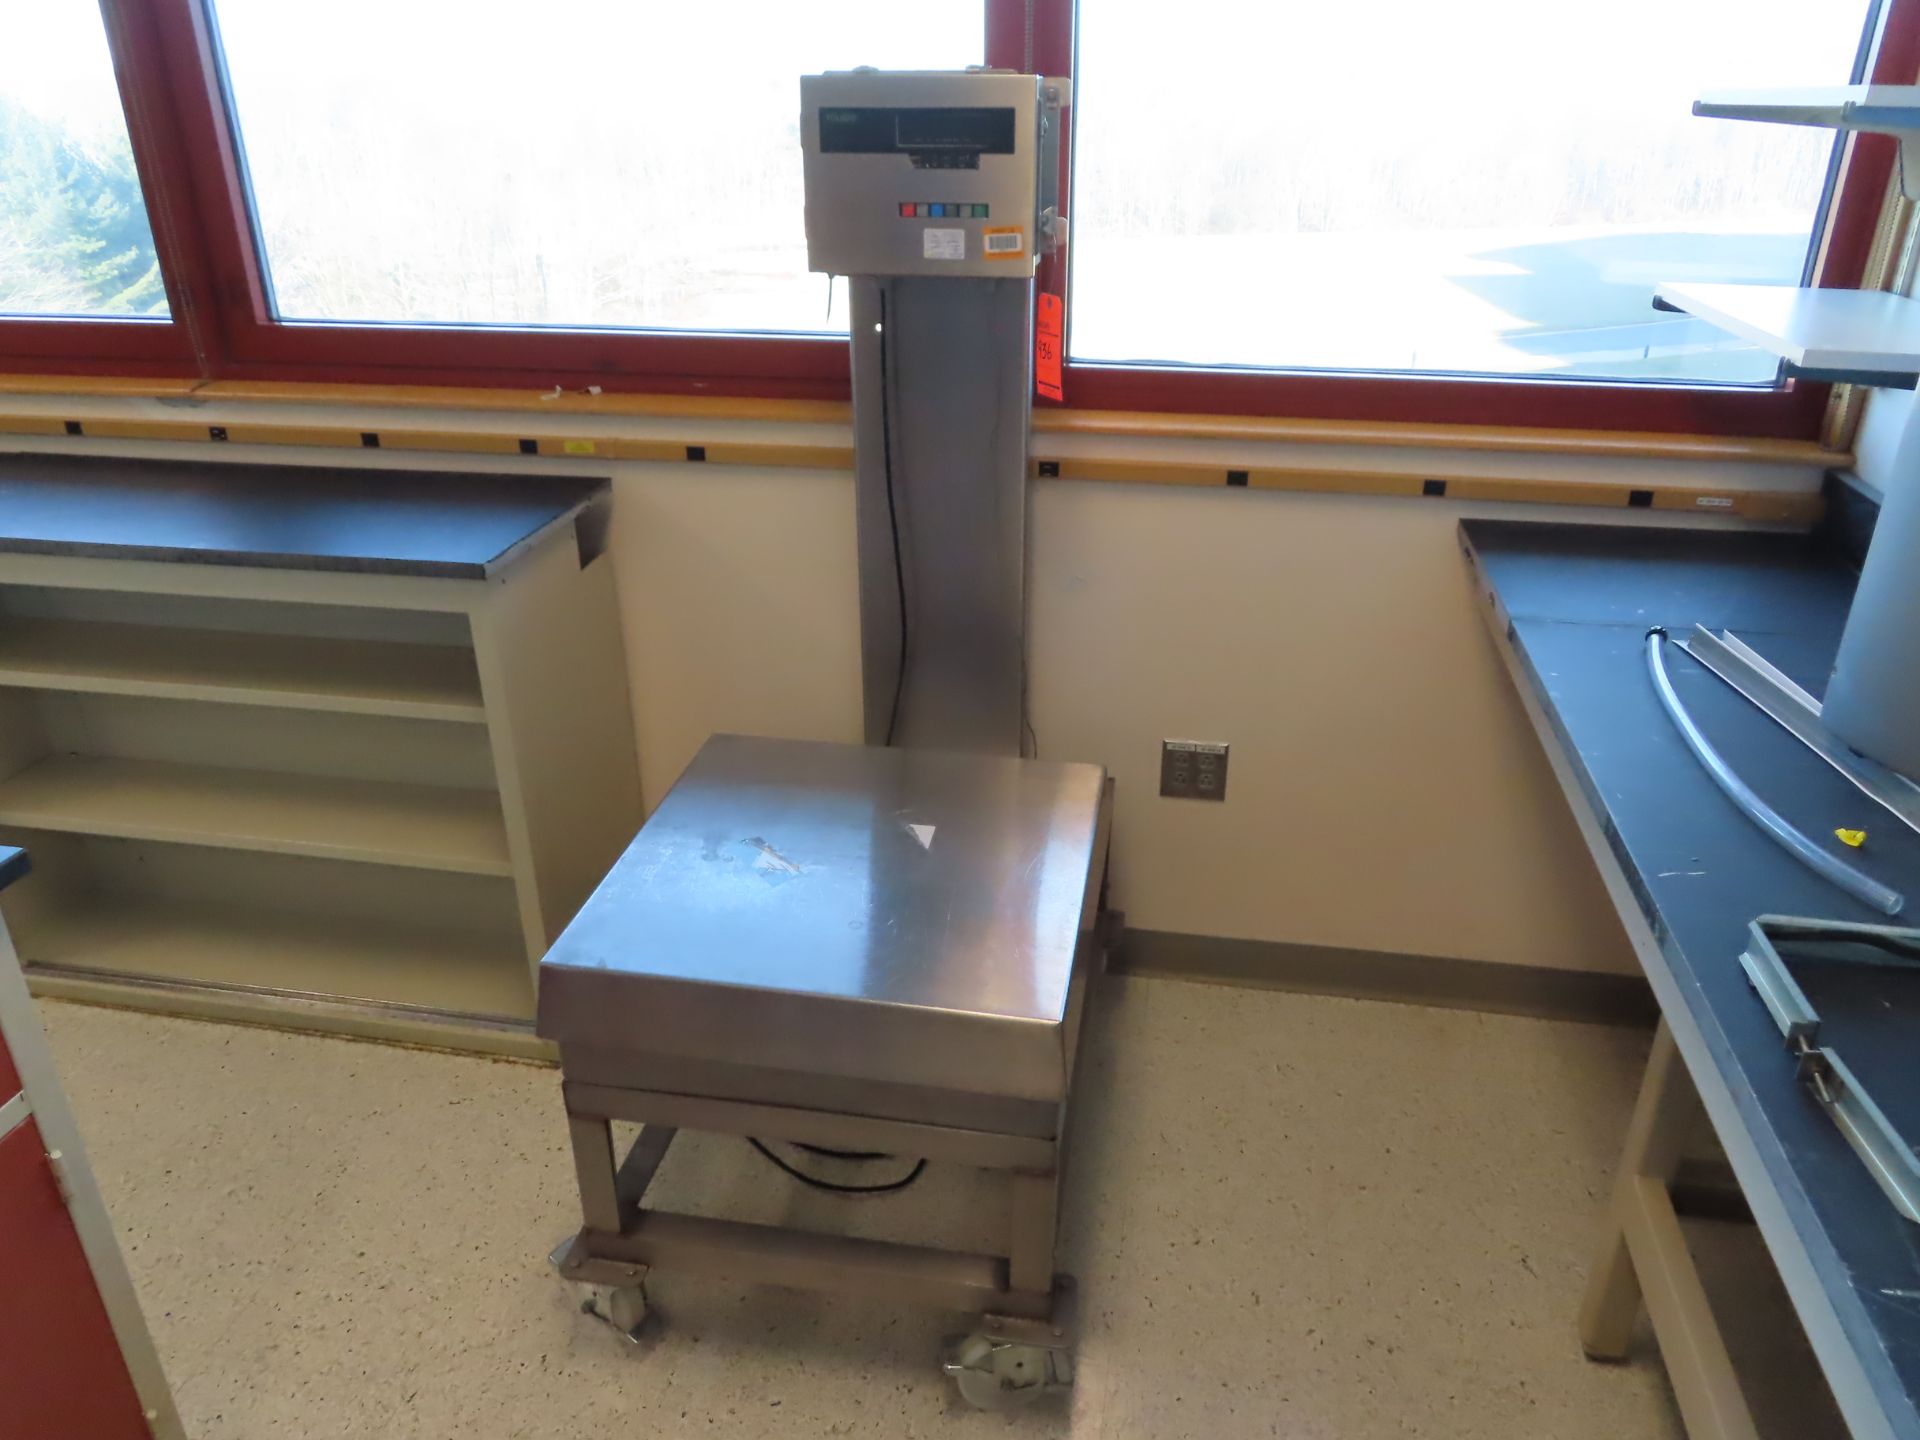 Toledo stainless steel 8140 platform scale, 2' X 2', located in D wing, 3rd floor, room 384A